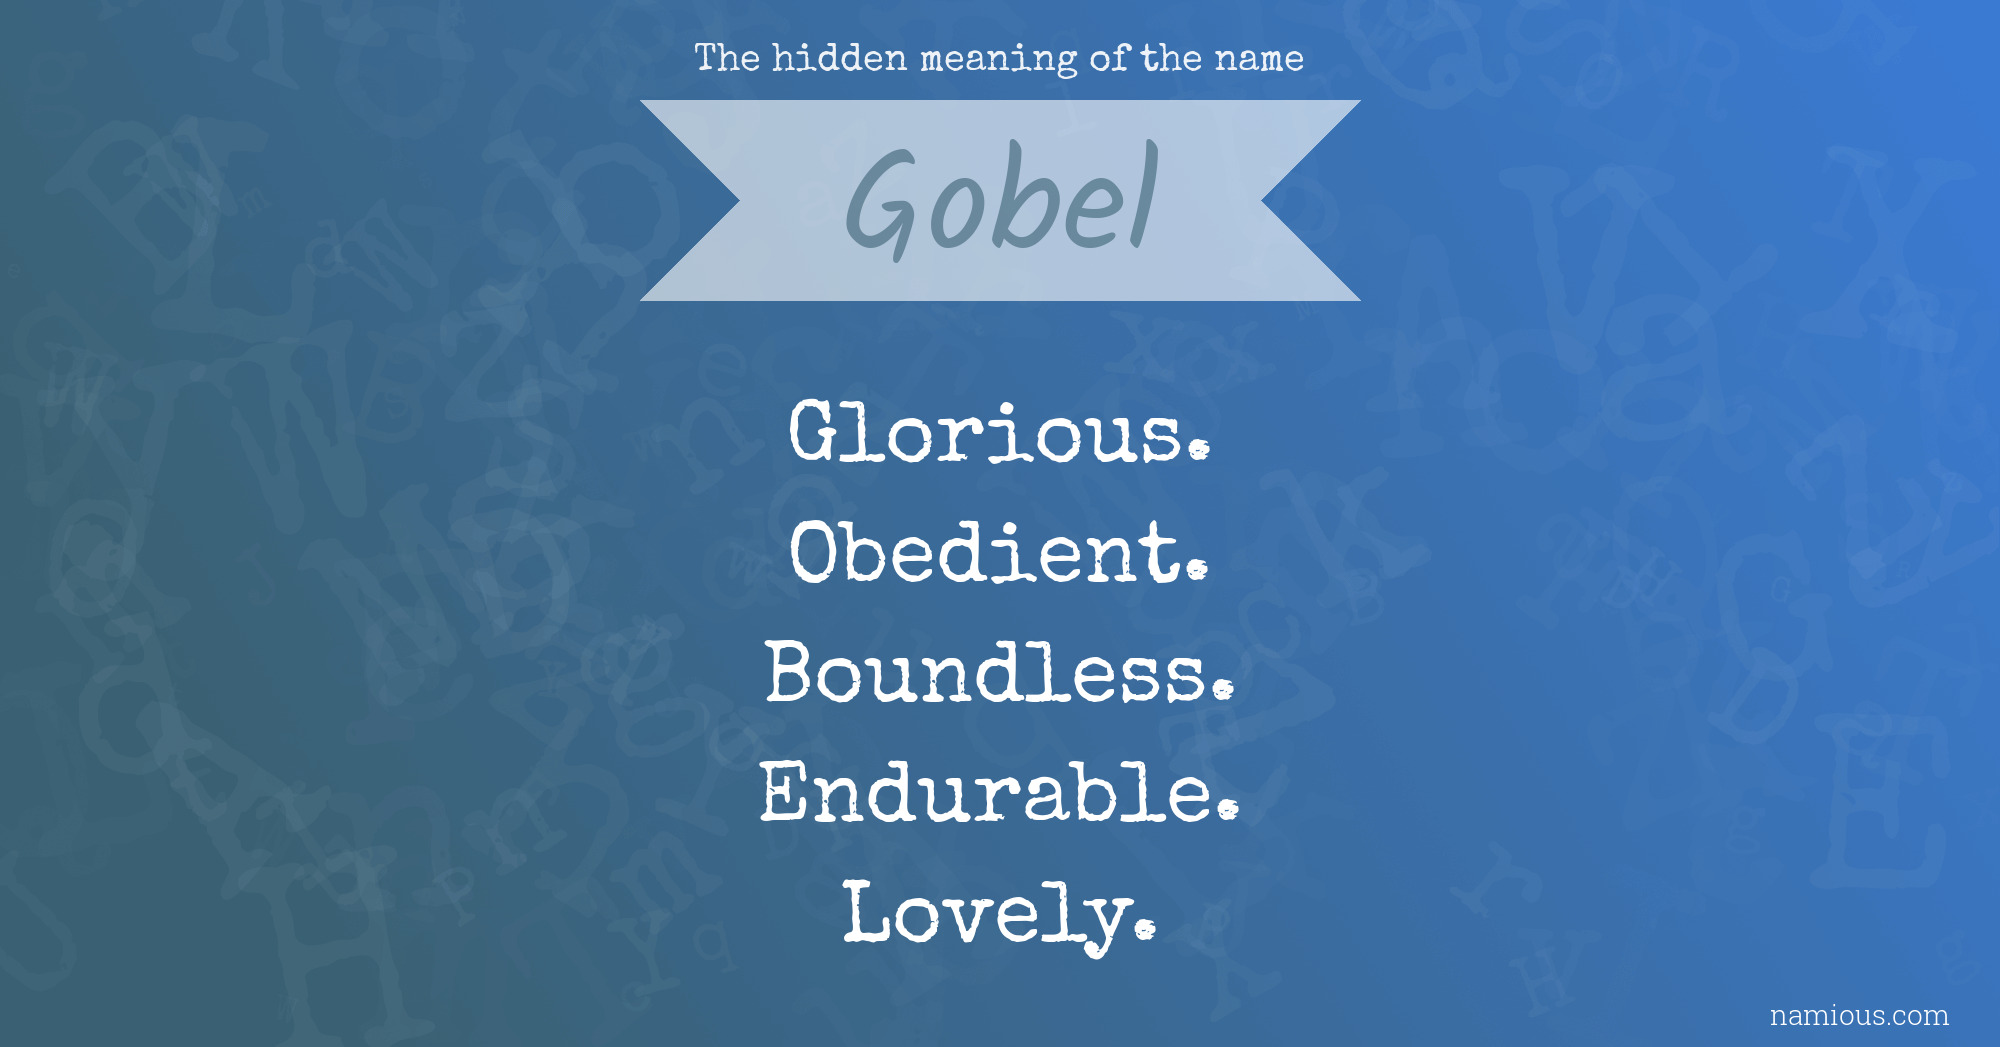 The hidden meaning of the name Gobel